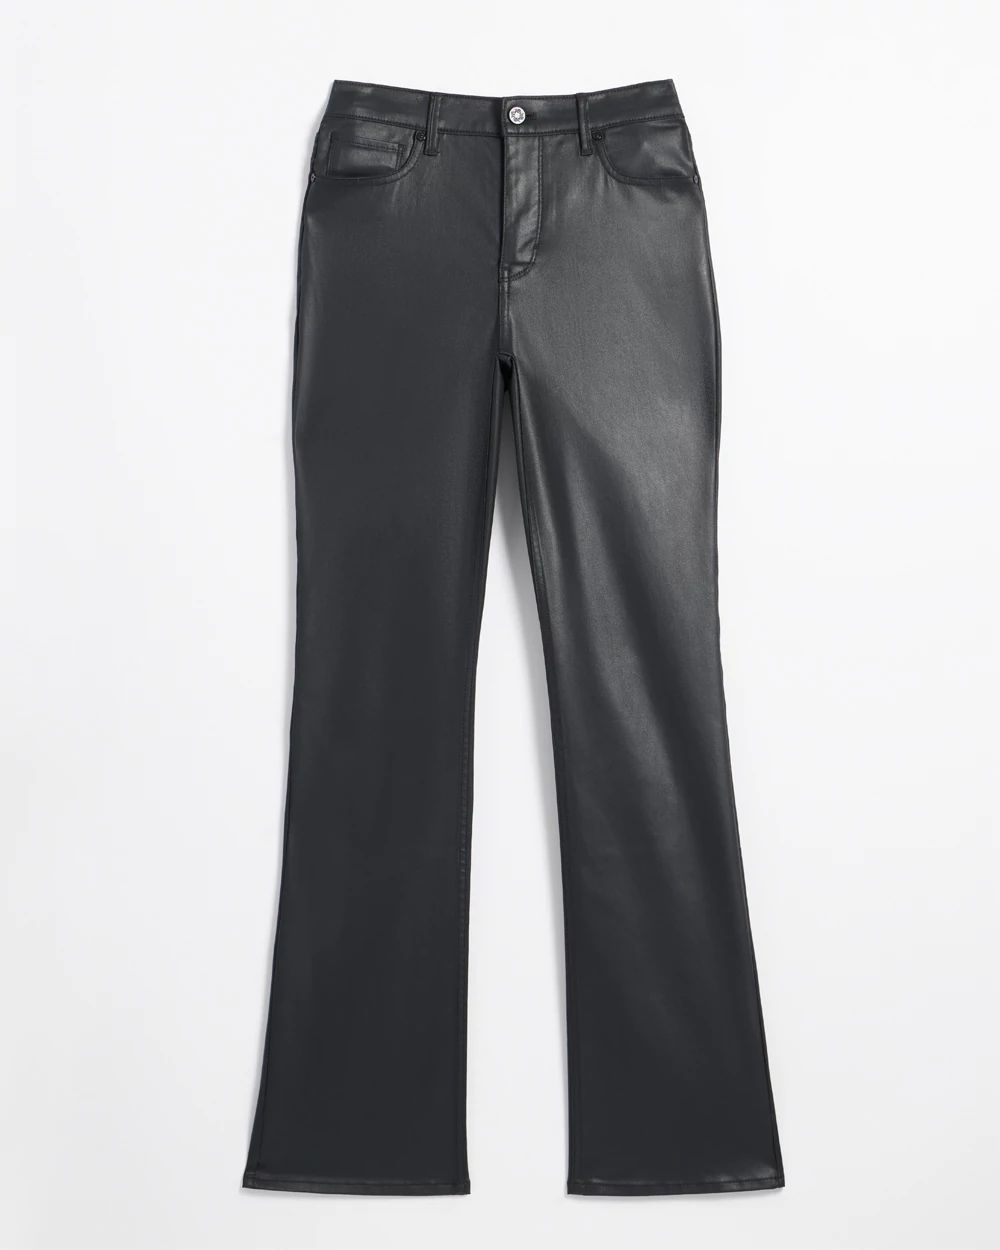 Petite High Rise Coated Bootcut Jeans click to view larger image.